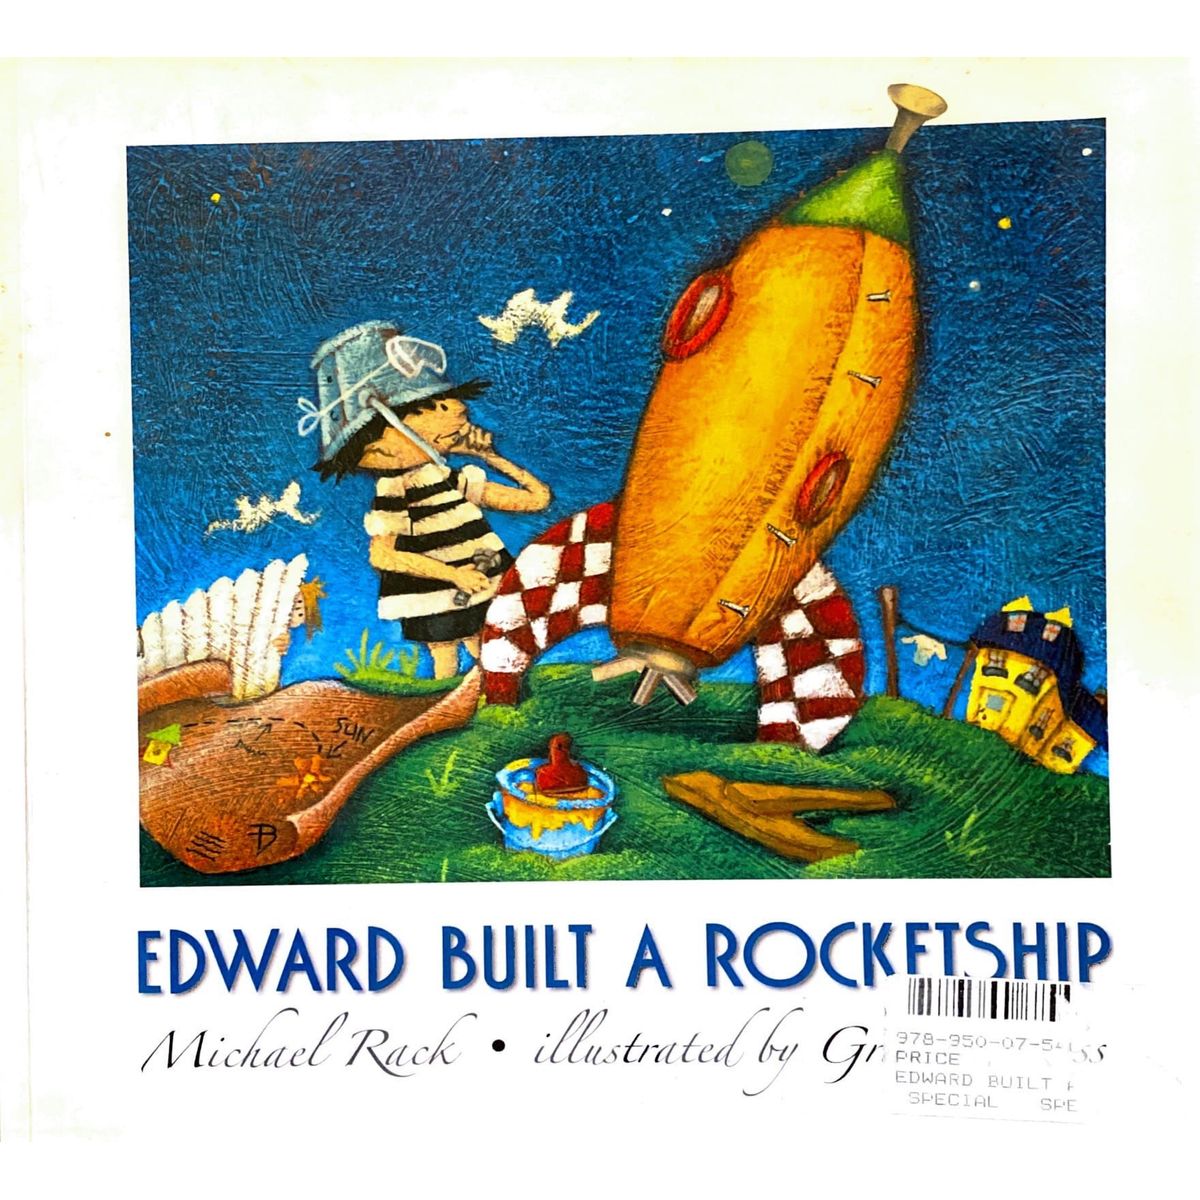 ISBN is 9781845395148 / 184539514X - Edward Built a Rocket Ship by Michael Rack, illustrated by Graham Ross [2010]